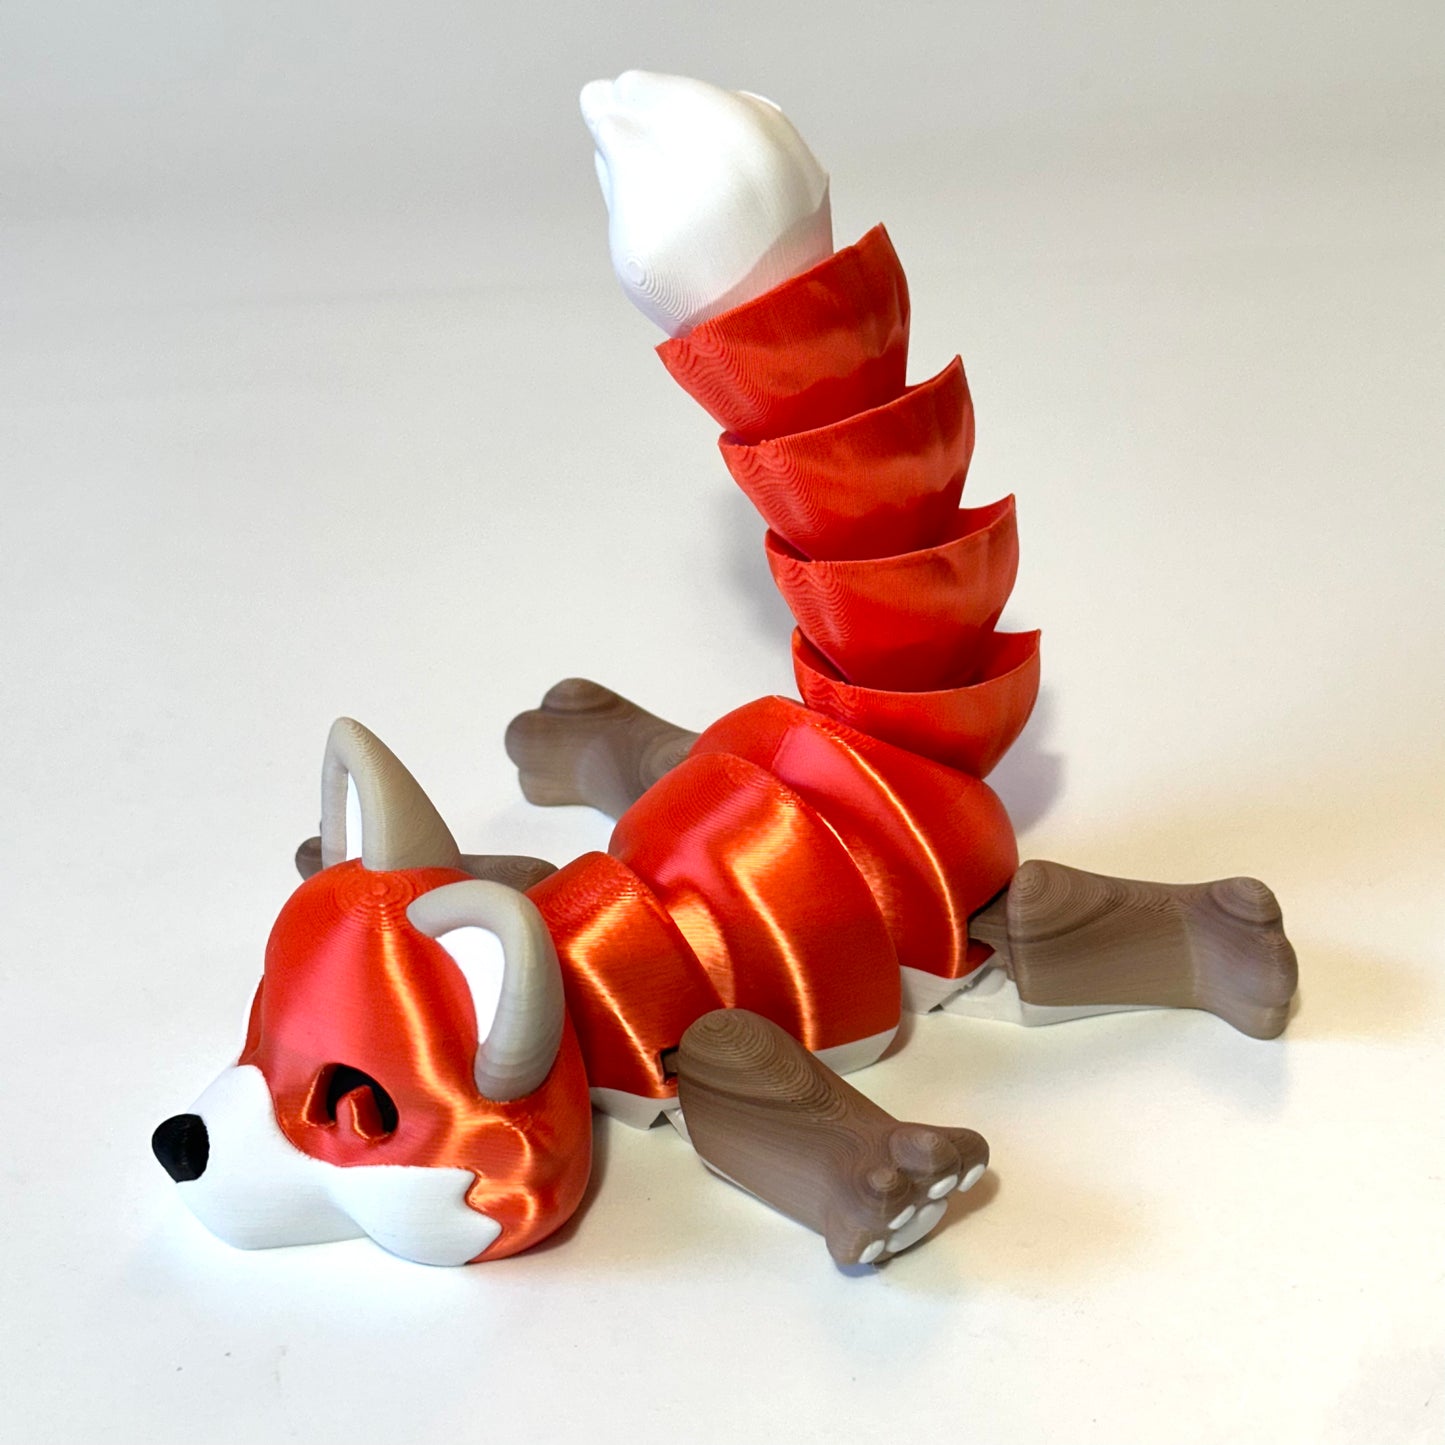 Giant Fox - 3D Printed Articulating Figure